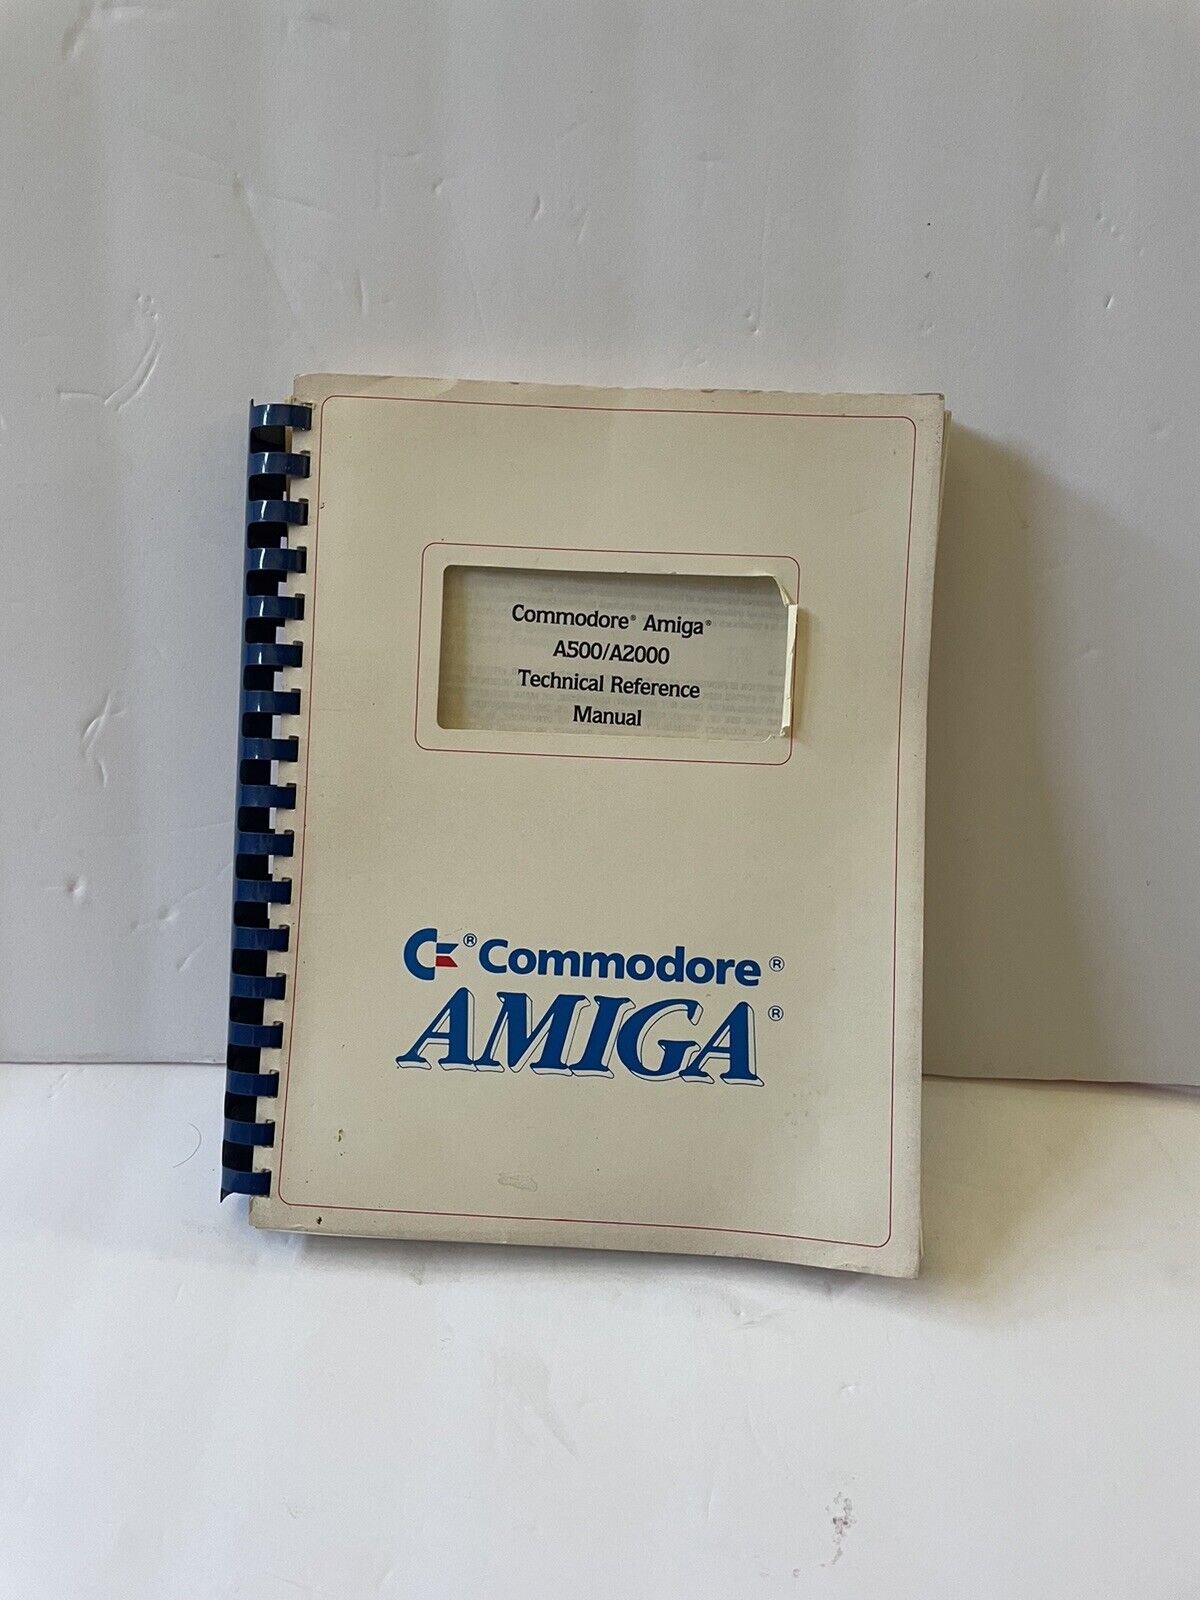 Commodore Amiga A500/A2000 Technical Reference Manual Great Shape